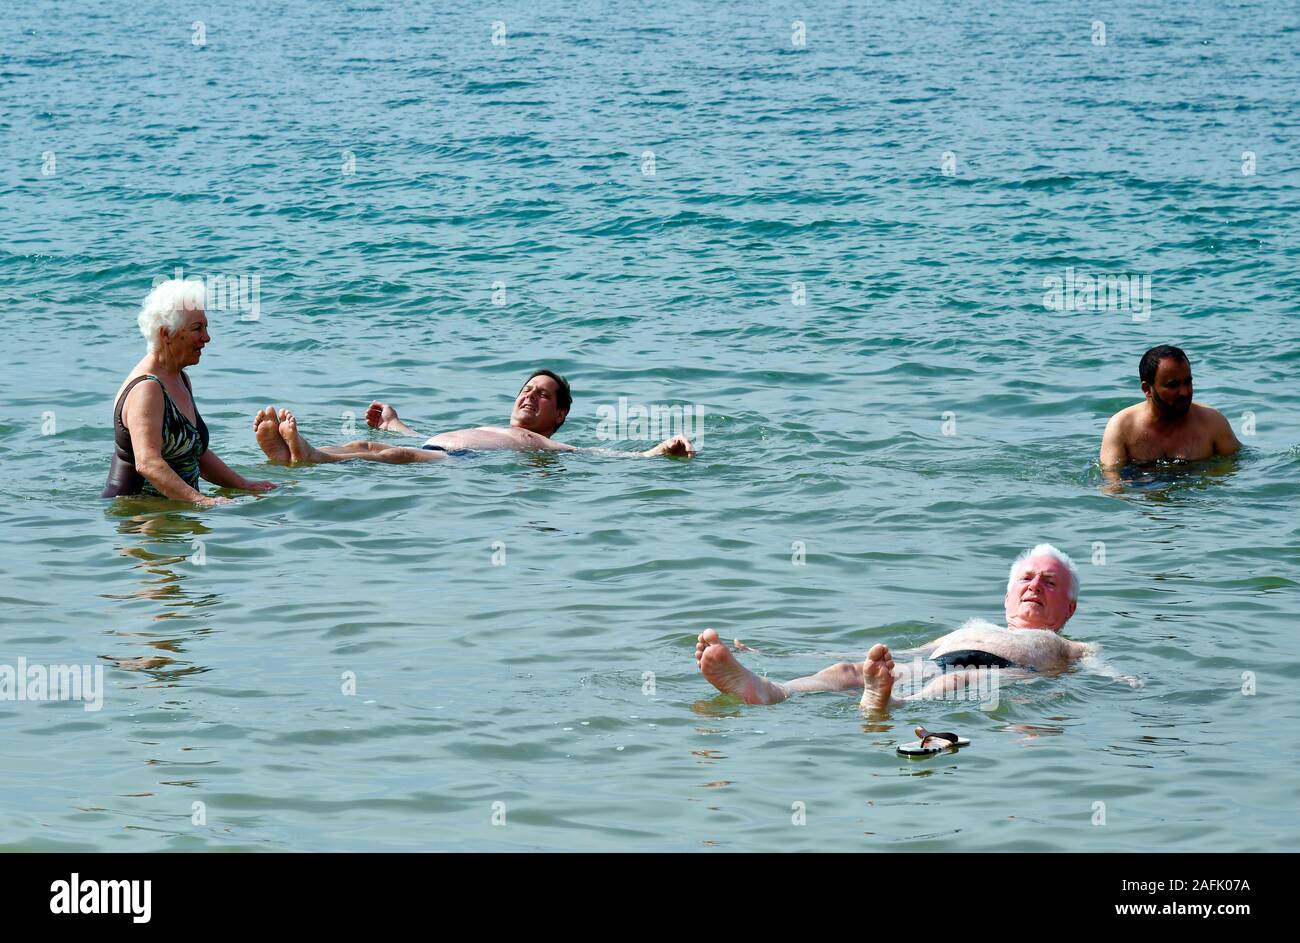 Dead Sea, Jordan - March 05, 2019: Unidentified people enjoy swim in Dead Sea, a salt lake 400m below sea level, water and mud is used for therapeutic Stock Photo